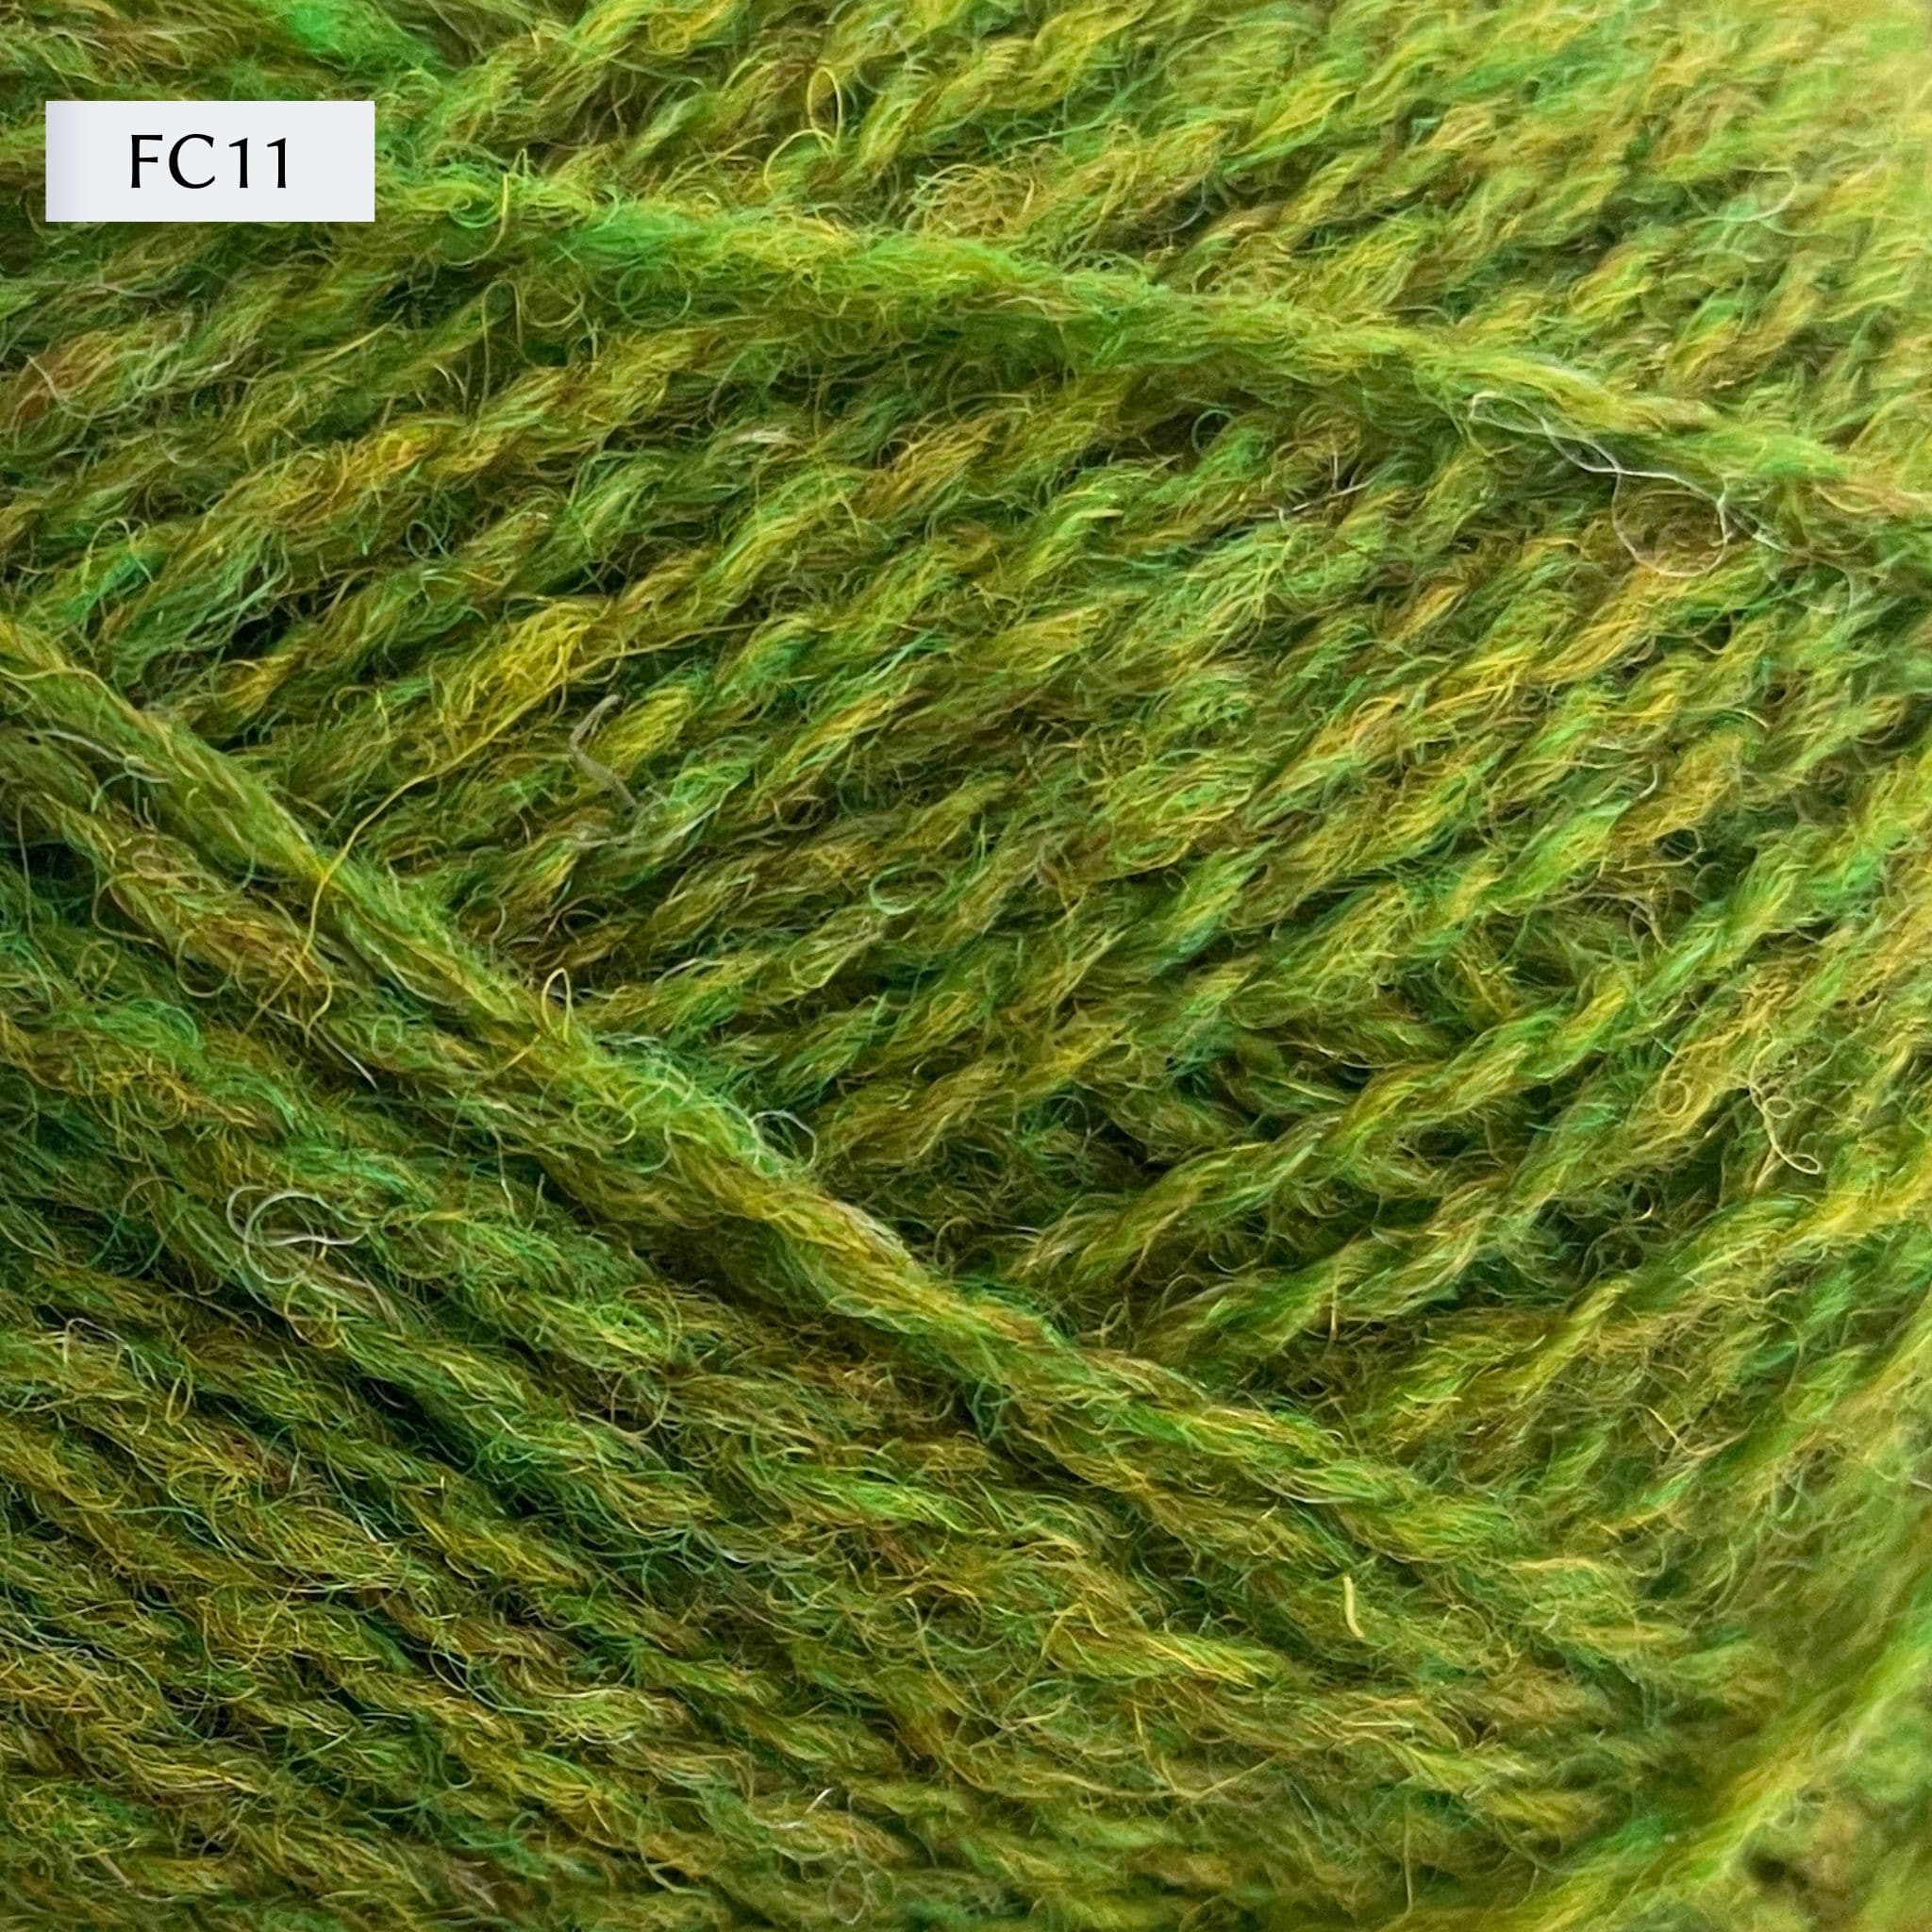 Jamieson & Smith 2ply Jumper Weight, light fingering weight yarn, in color FC11, a heathered yellow-green